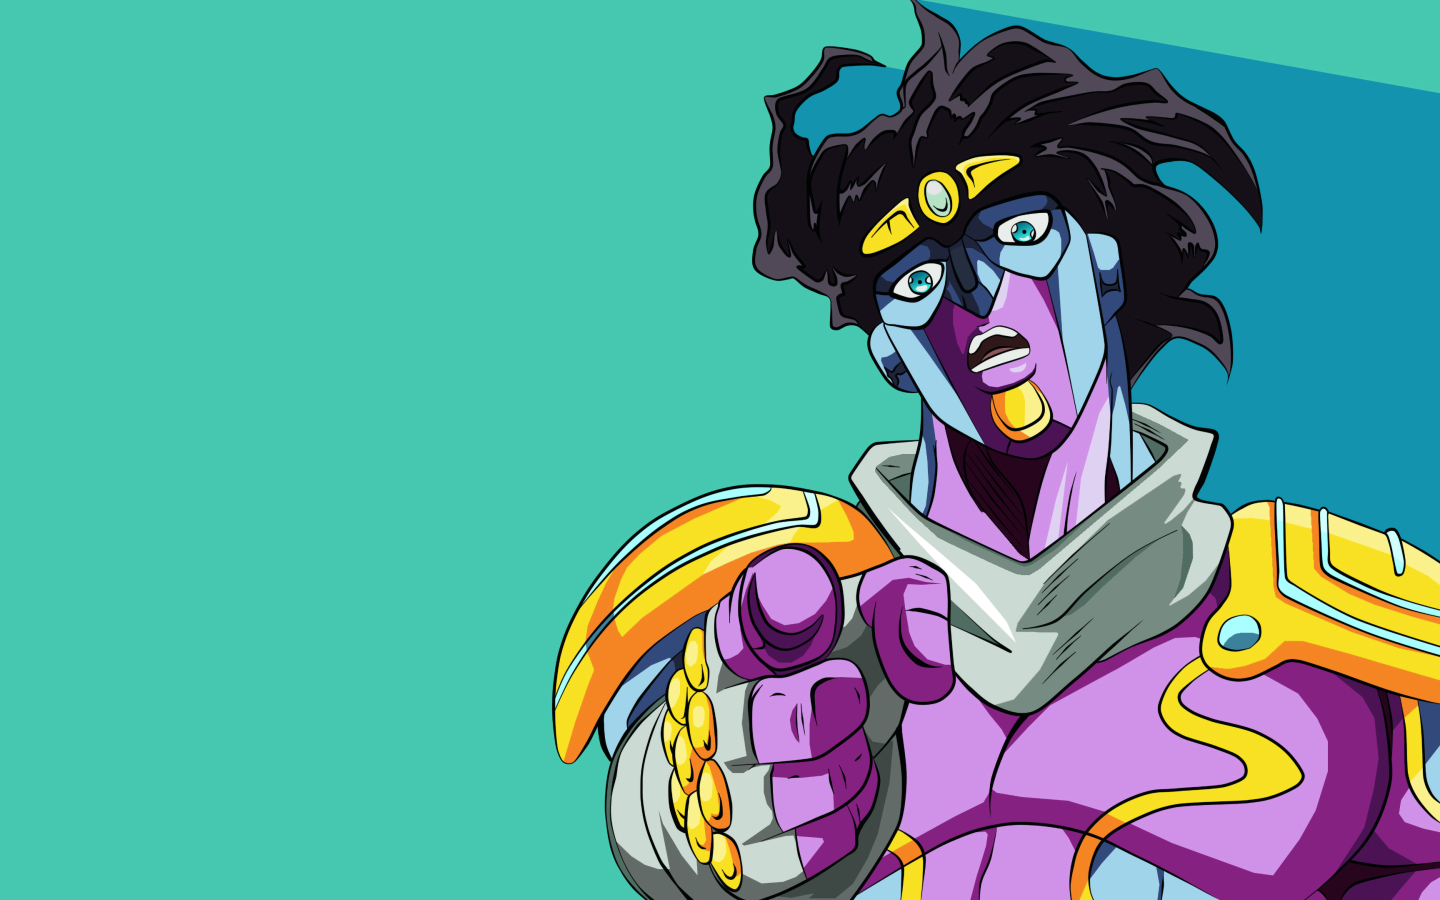 1440x900 Star Platinum 1440x900 Wallpaper Hd Anime 4k Wallpapers Images Photos And Background